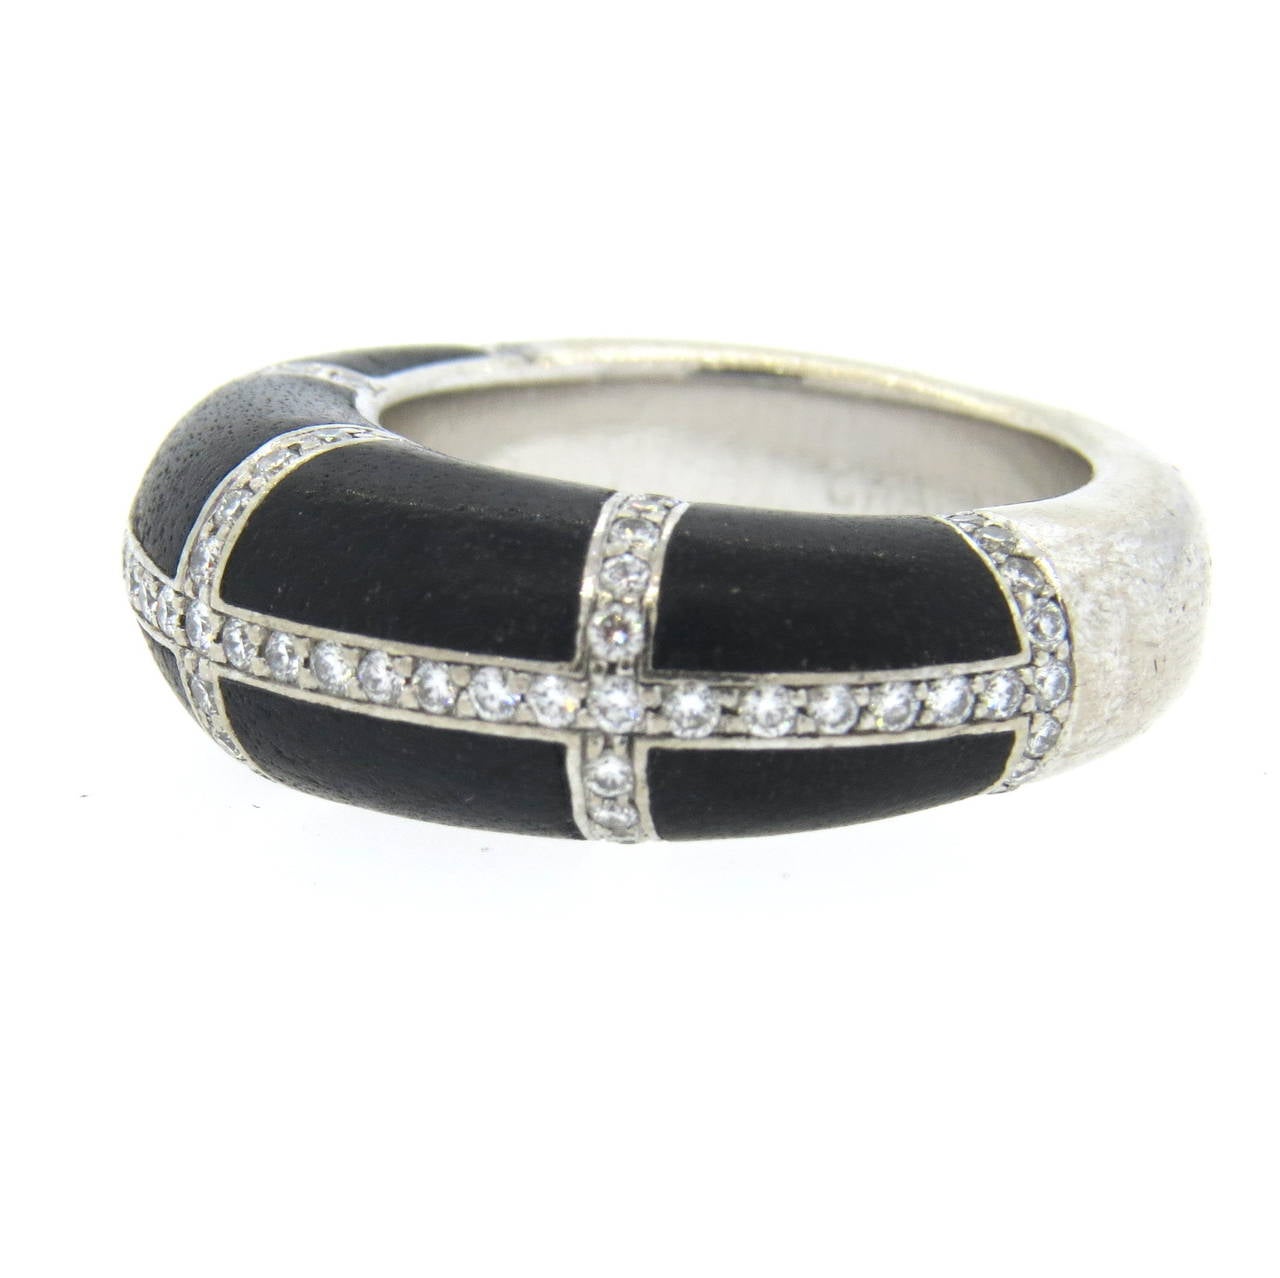 An 18k white gold ring set with Jet (Fossilized Wood) and approx. 0.70cts in G/VS diamonds. Crafted by Chaumet, the ring is a size 6 and is 8.5mm wide at the widest point.  The ring sits 6.5mm from the top of finger and weighs 13.7 grams.